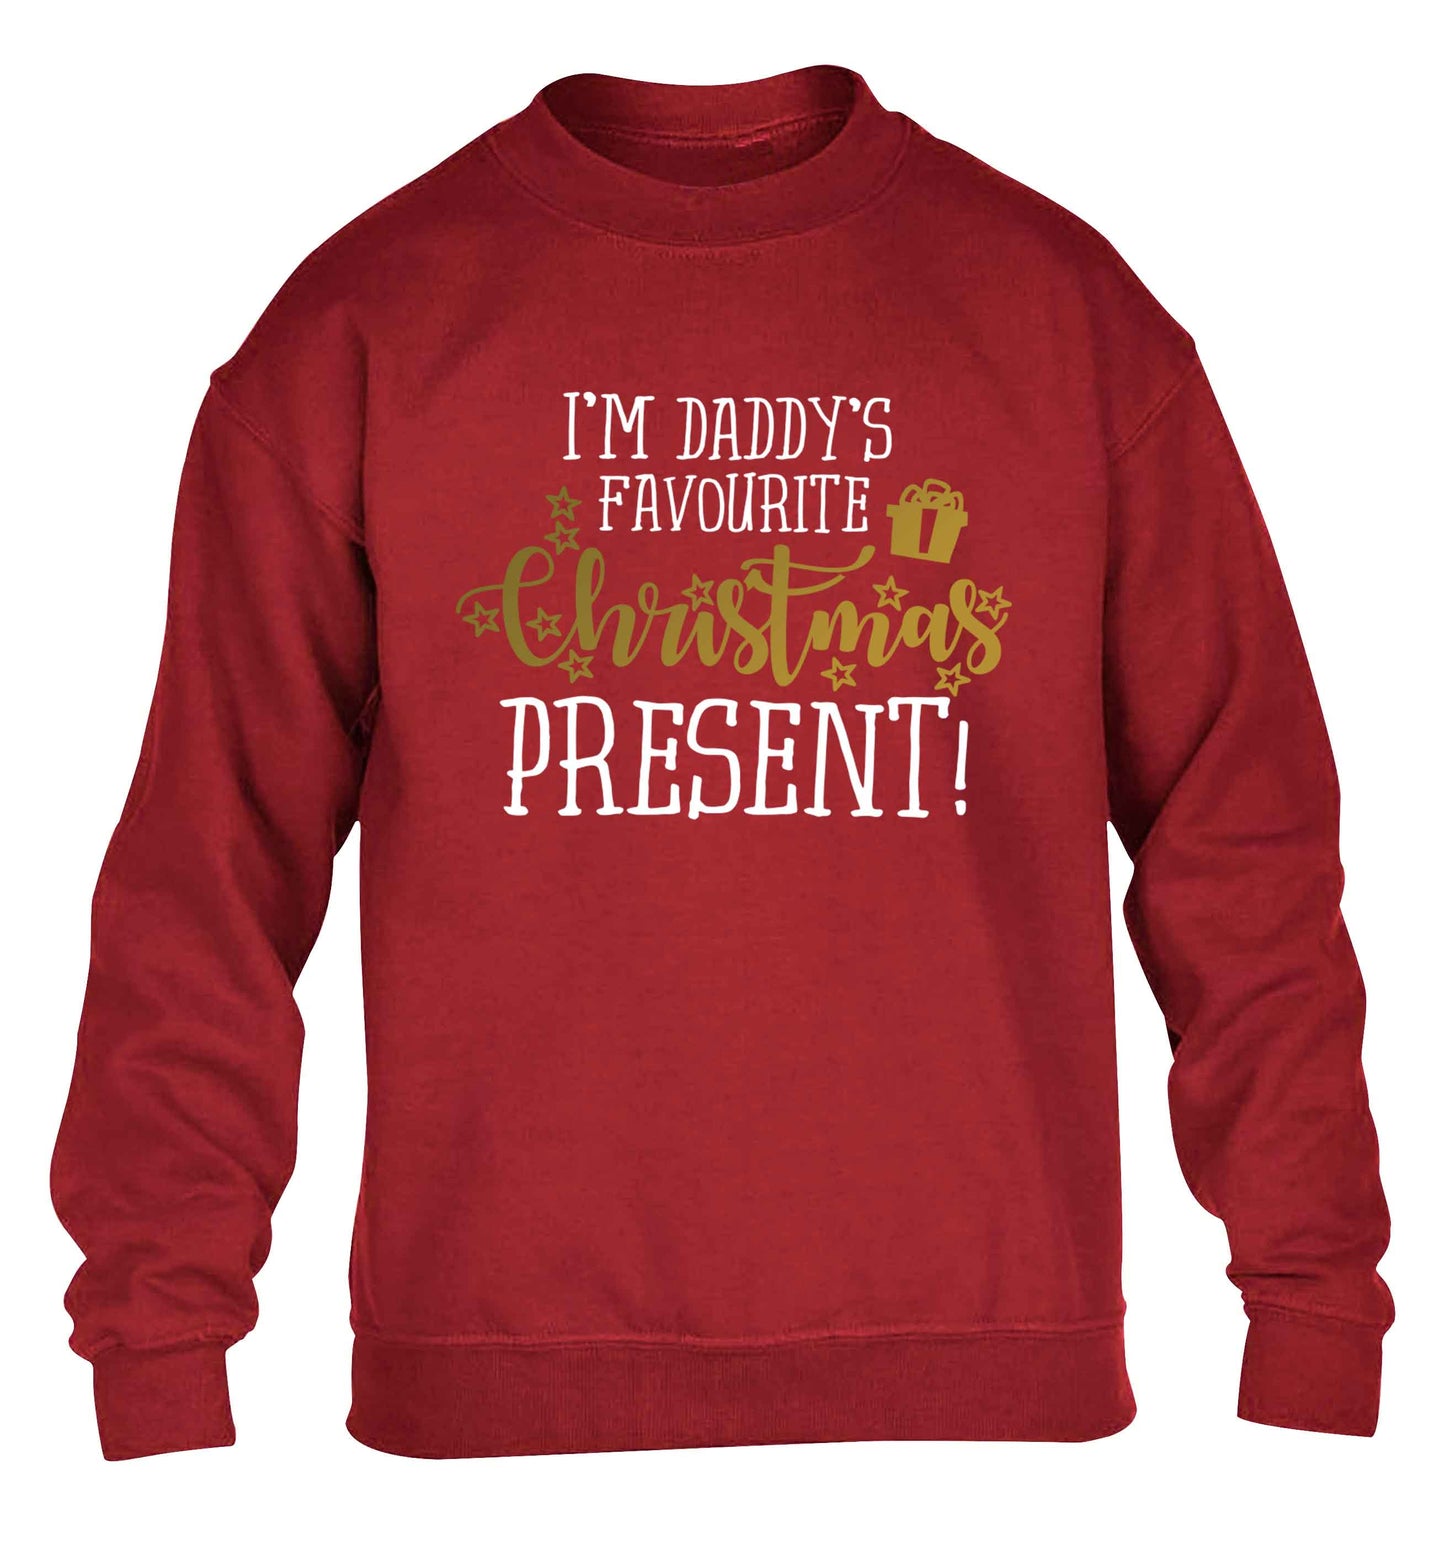 Daddy's favourite Christmas present children's grey sweater 12-13 Years